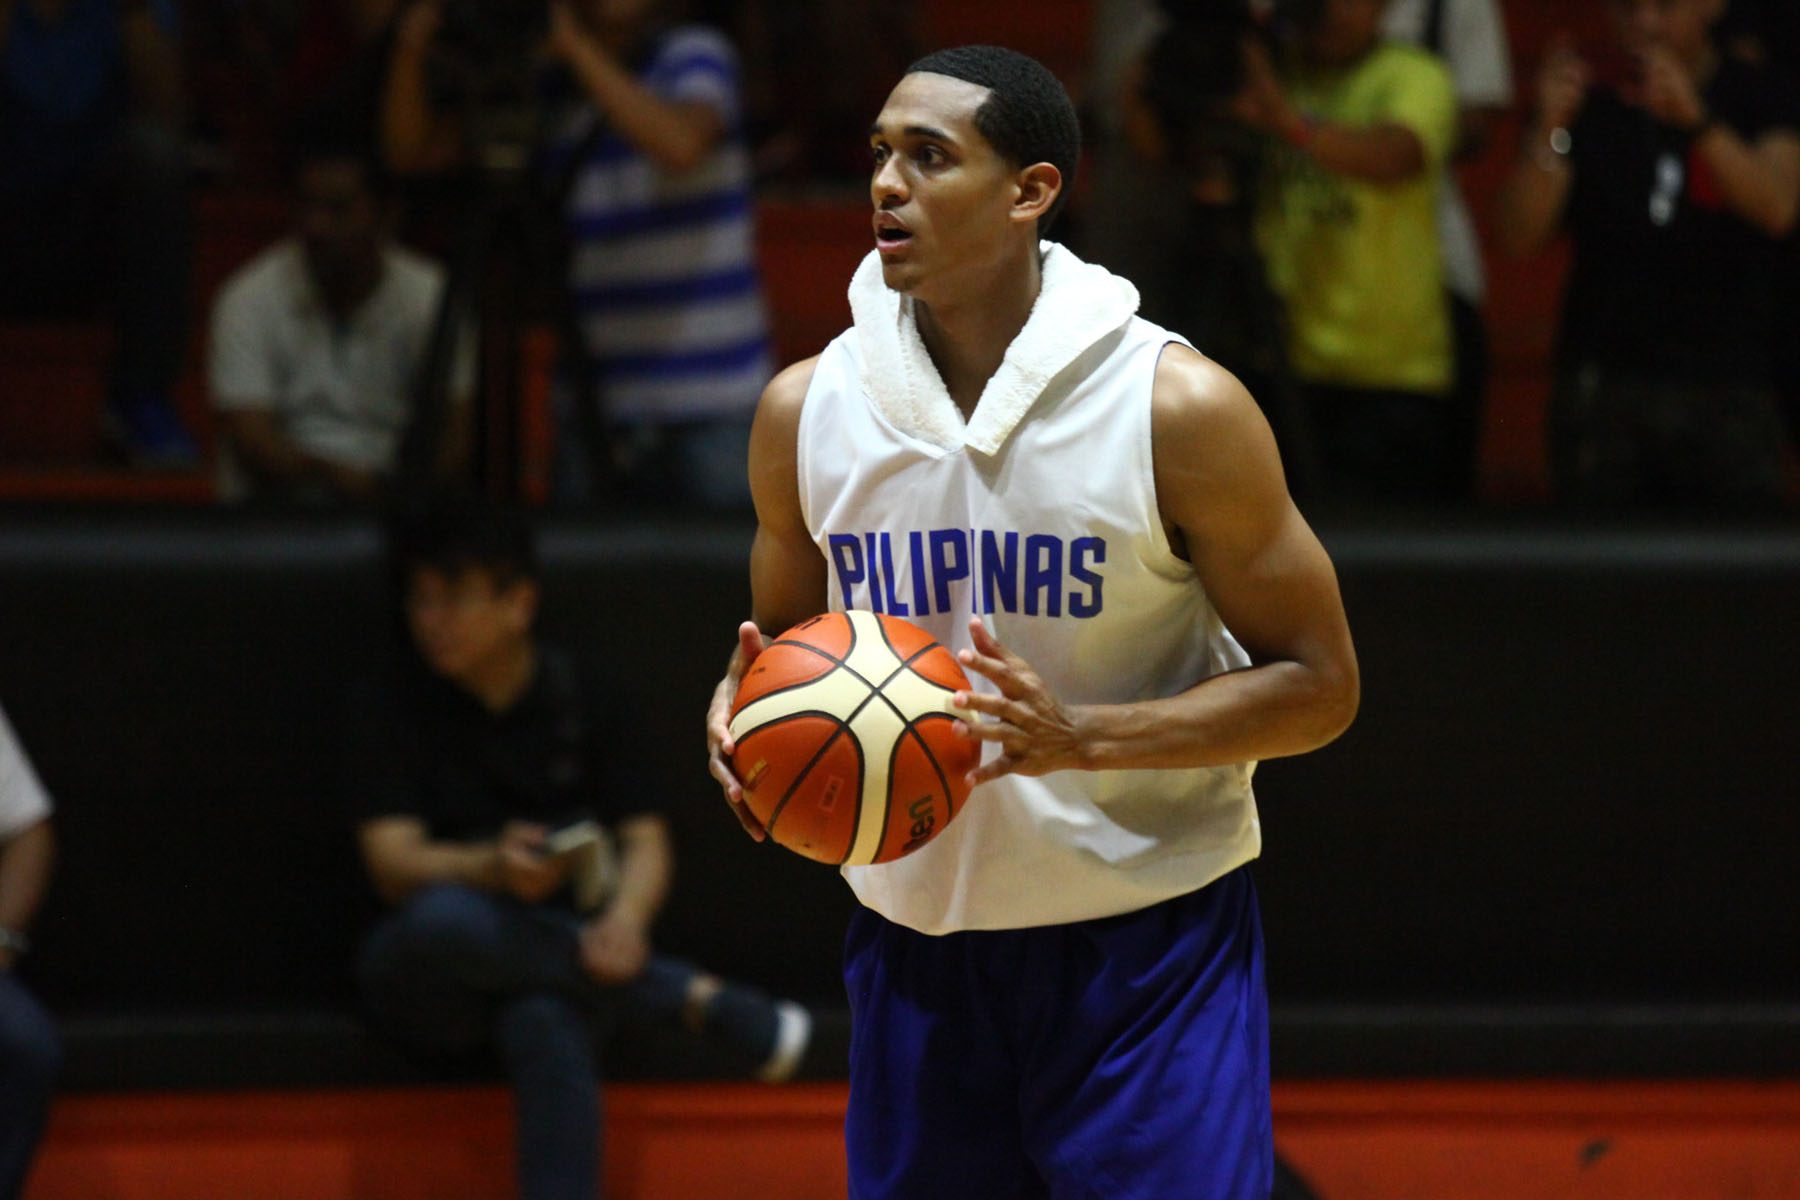 Why was Jordan Clarkson excluded from Gilas line-up? SBP explains